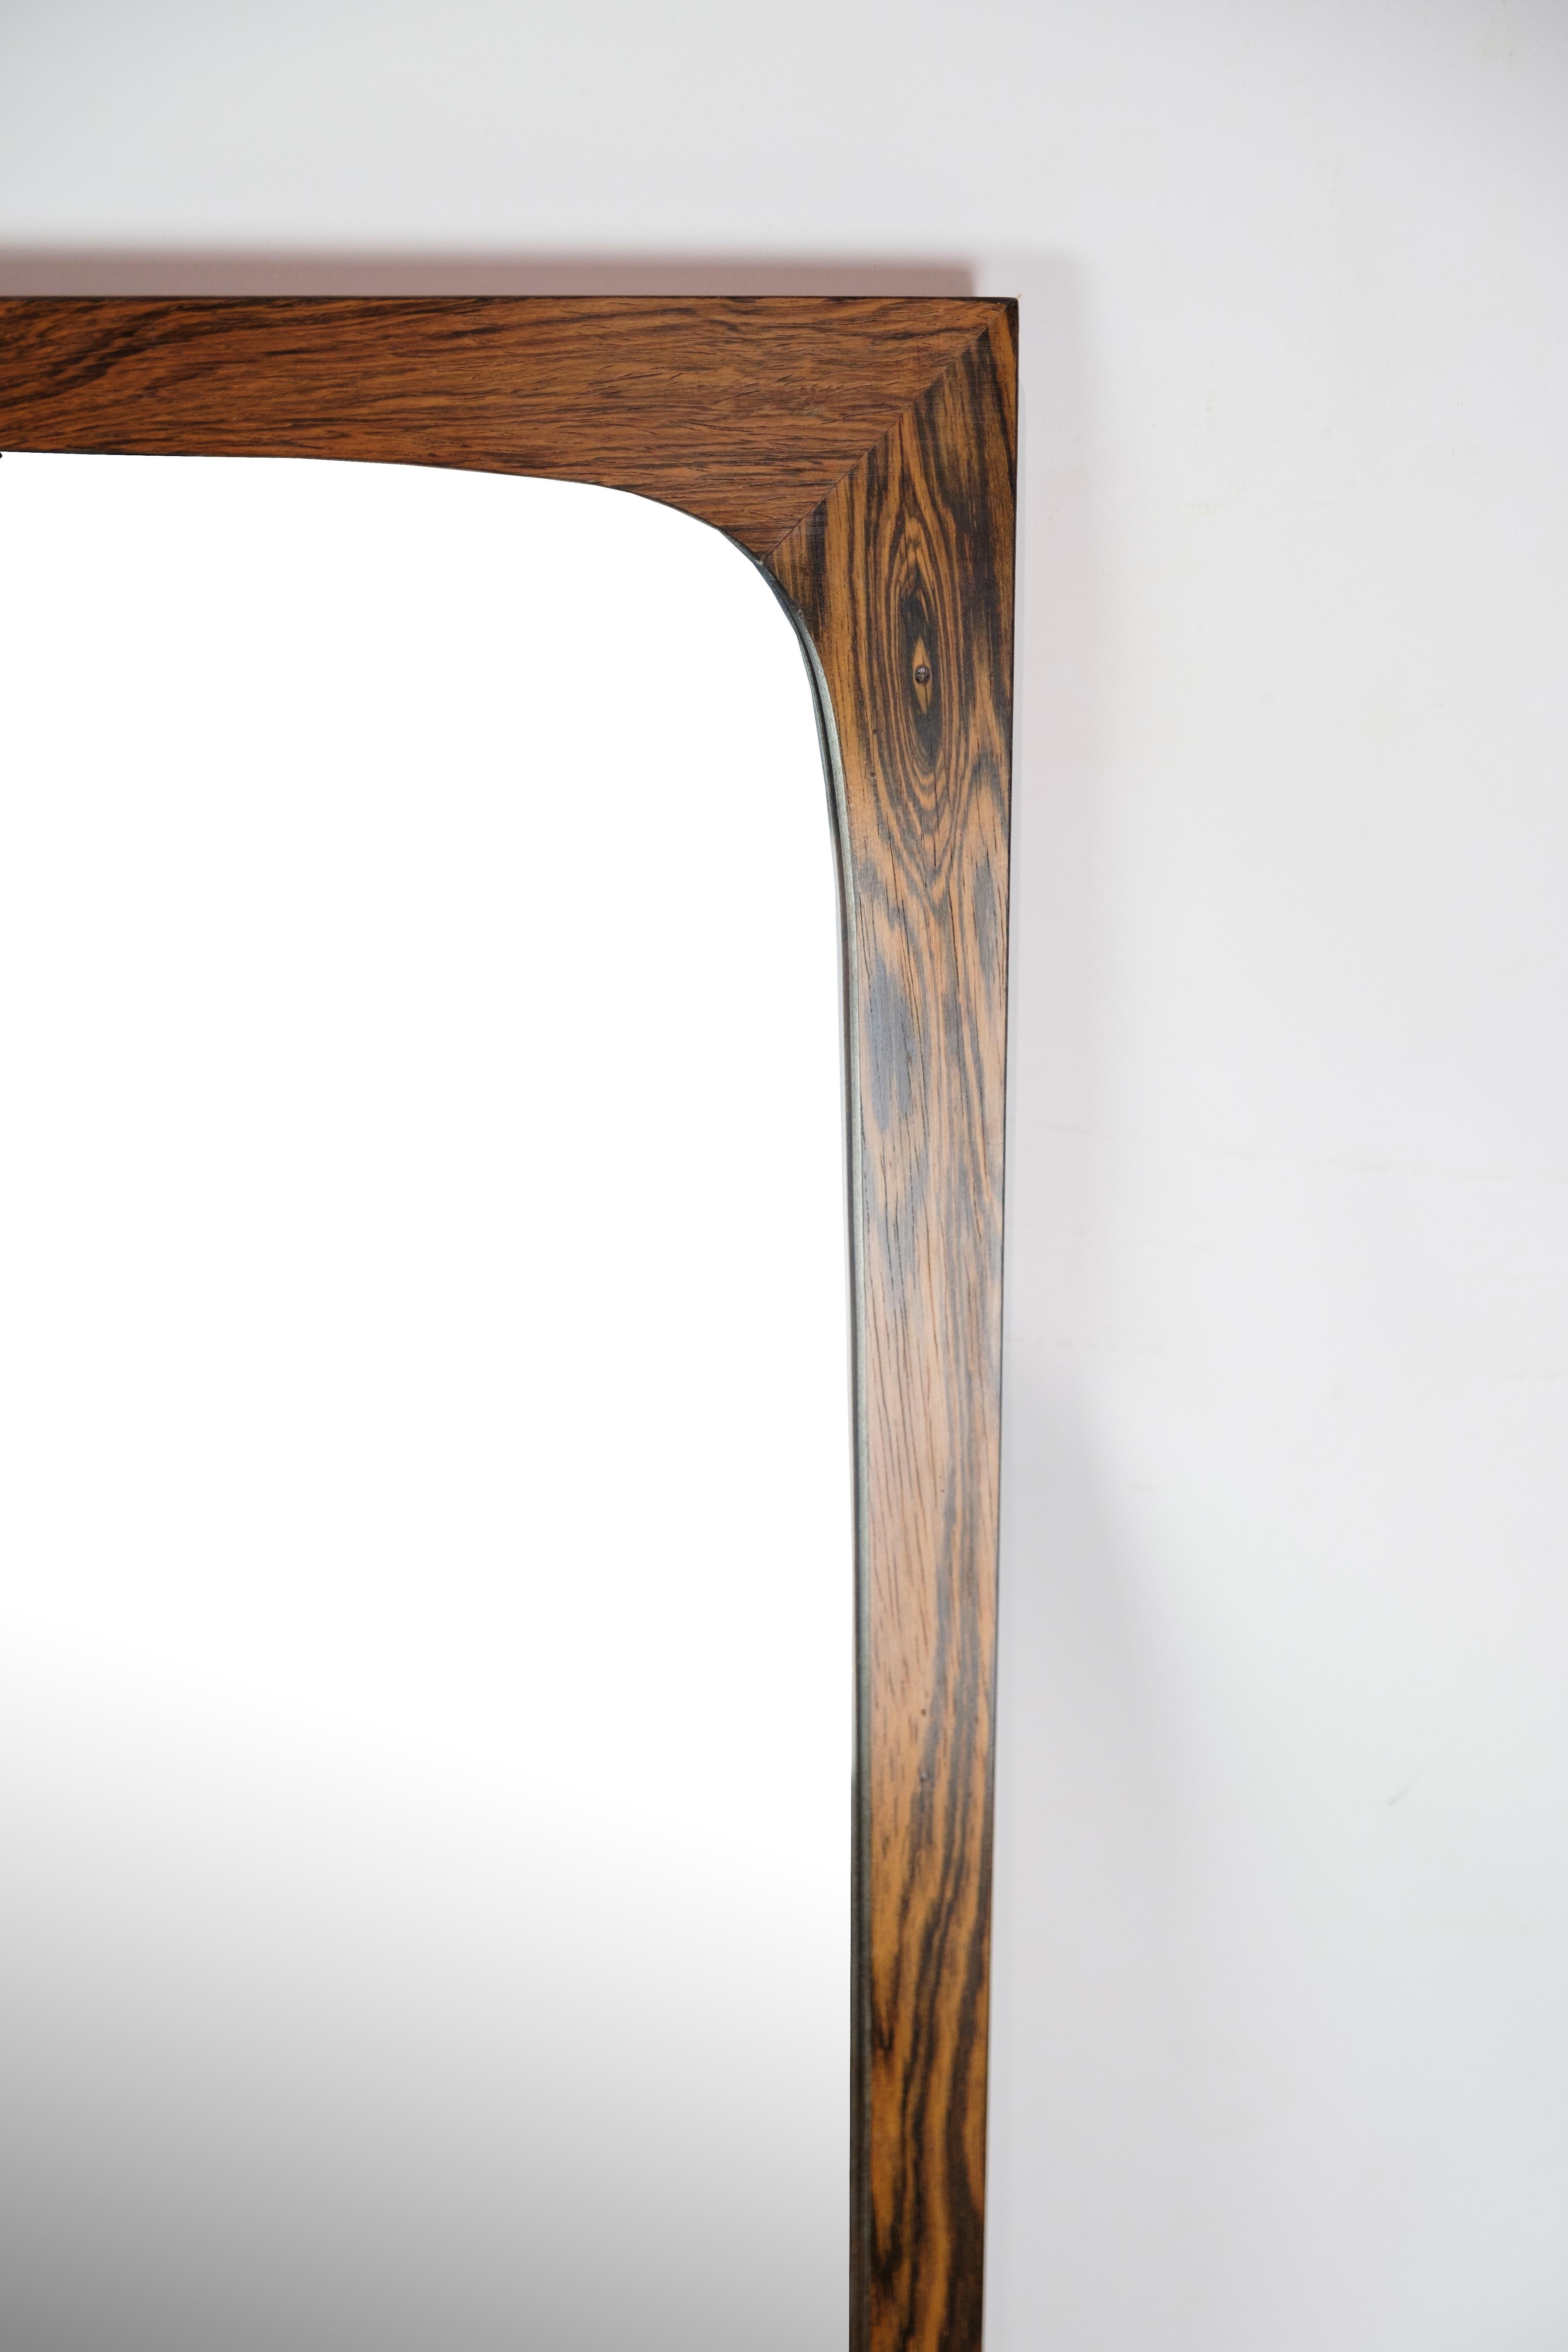 Mid-20th Century Mirror Made In Rosewood, Danish Design From 1960s For Sale